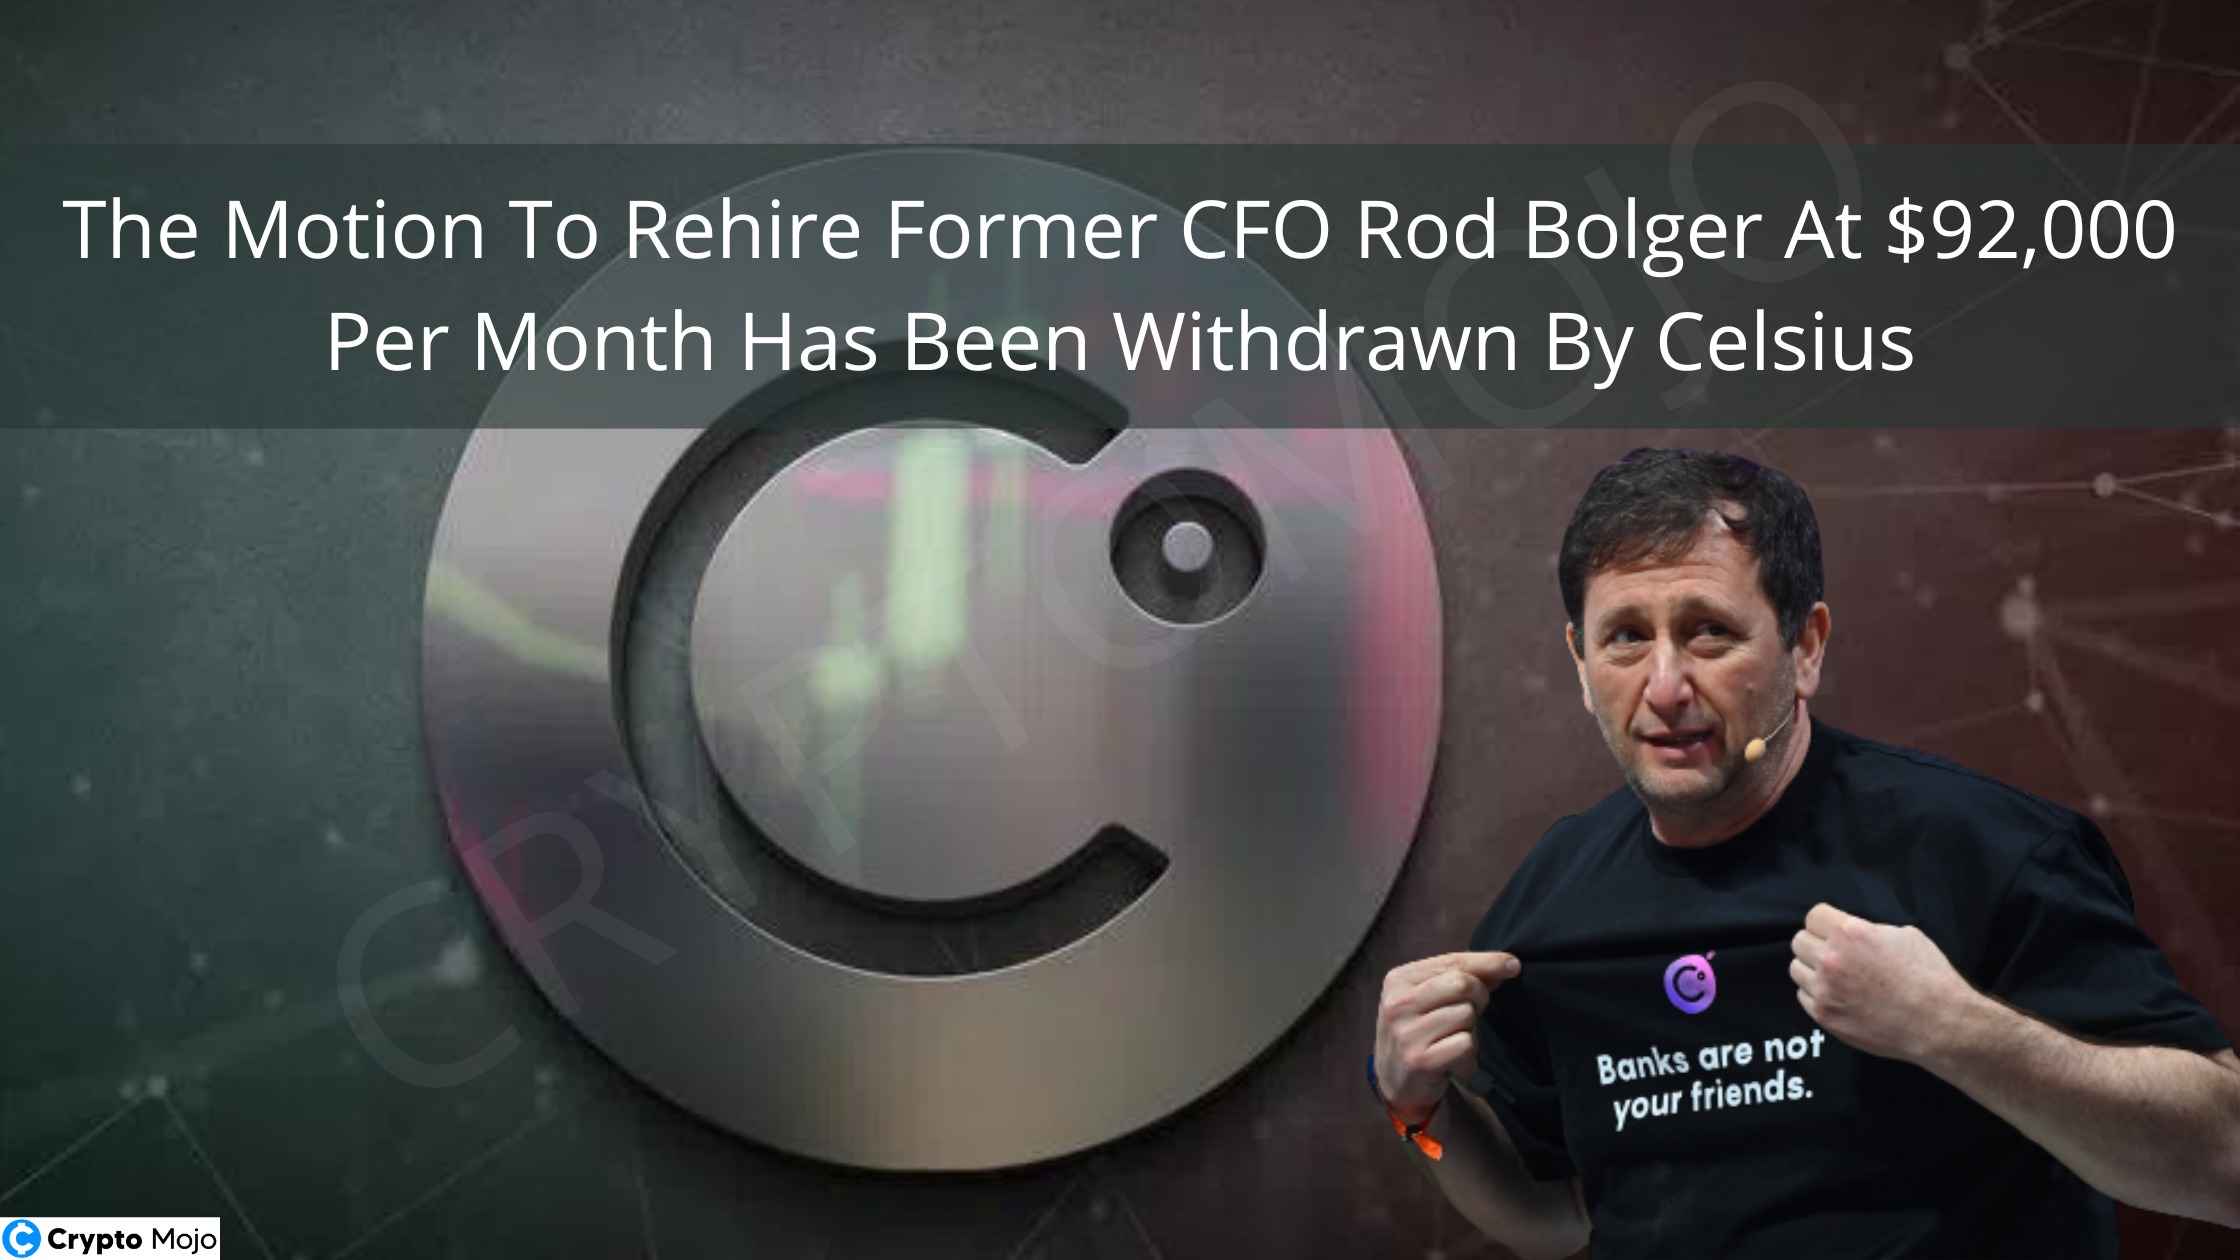 The Motion To Rehire Former CFO Rod Bolger At $92,000 Per Month Has Been Withdrawn By Celsius